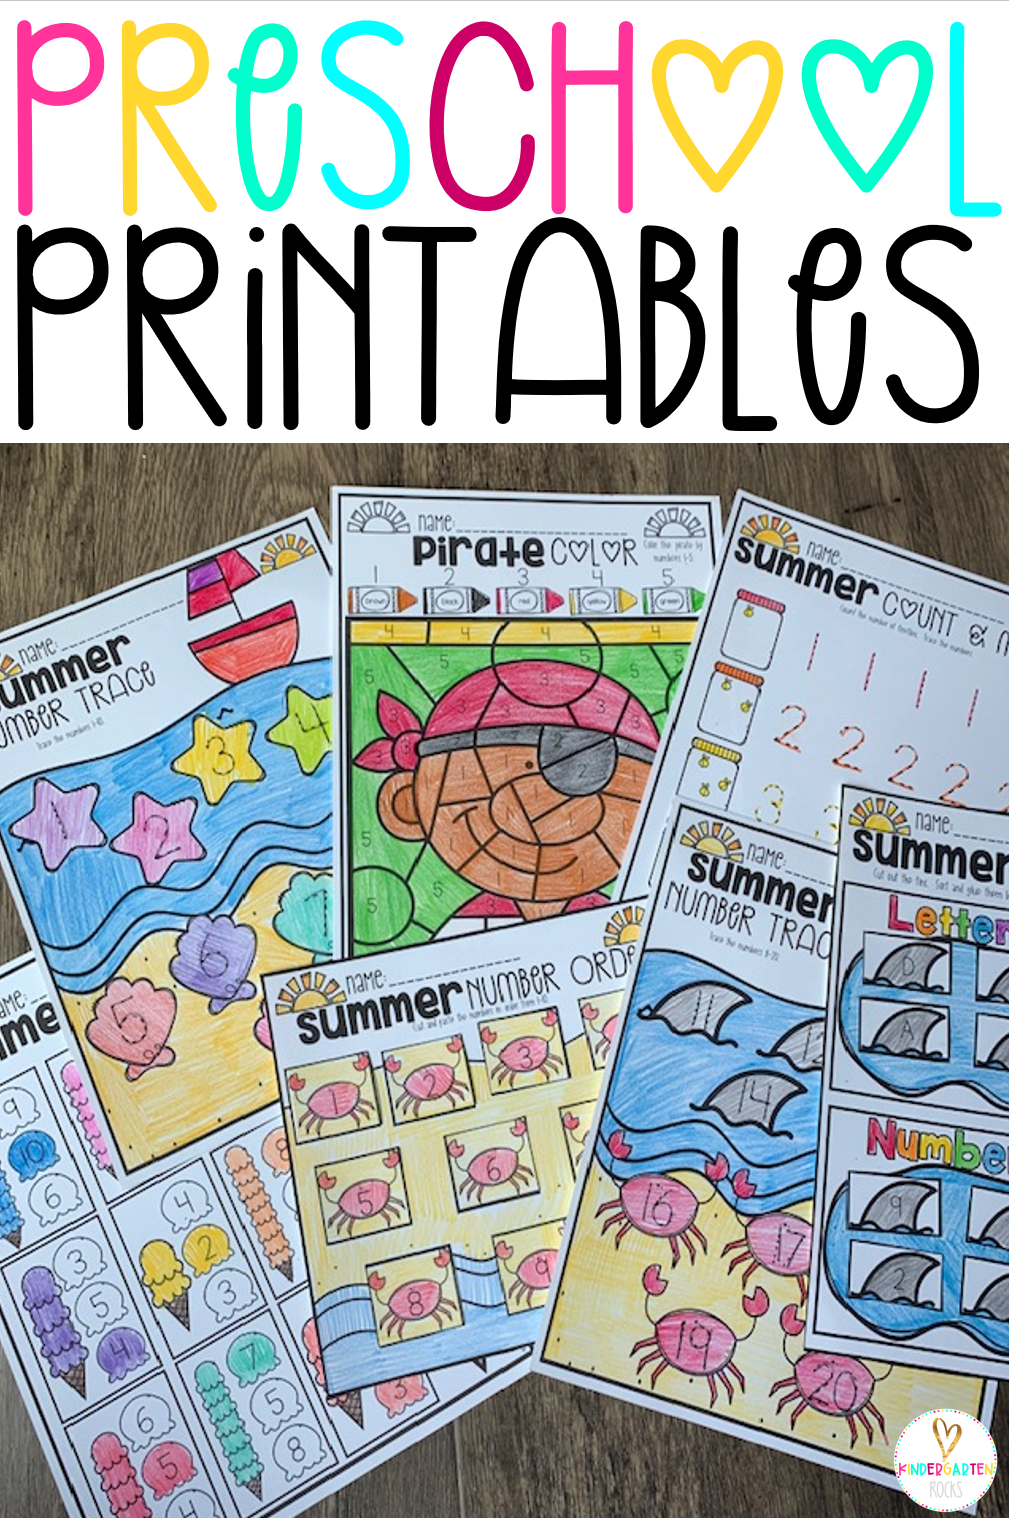 Are you looking for fun and engaging preschool worksheets and printables for the summer and to help your children get ready for kindergarten? Then, you will love Preschool Printables! #preschool #printables #activities #gettingreadyforkindergarten #worksheets